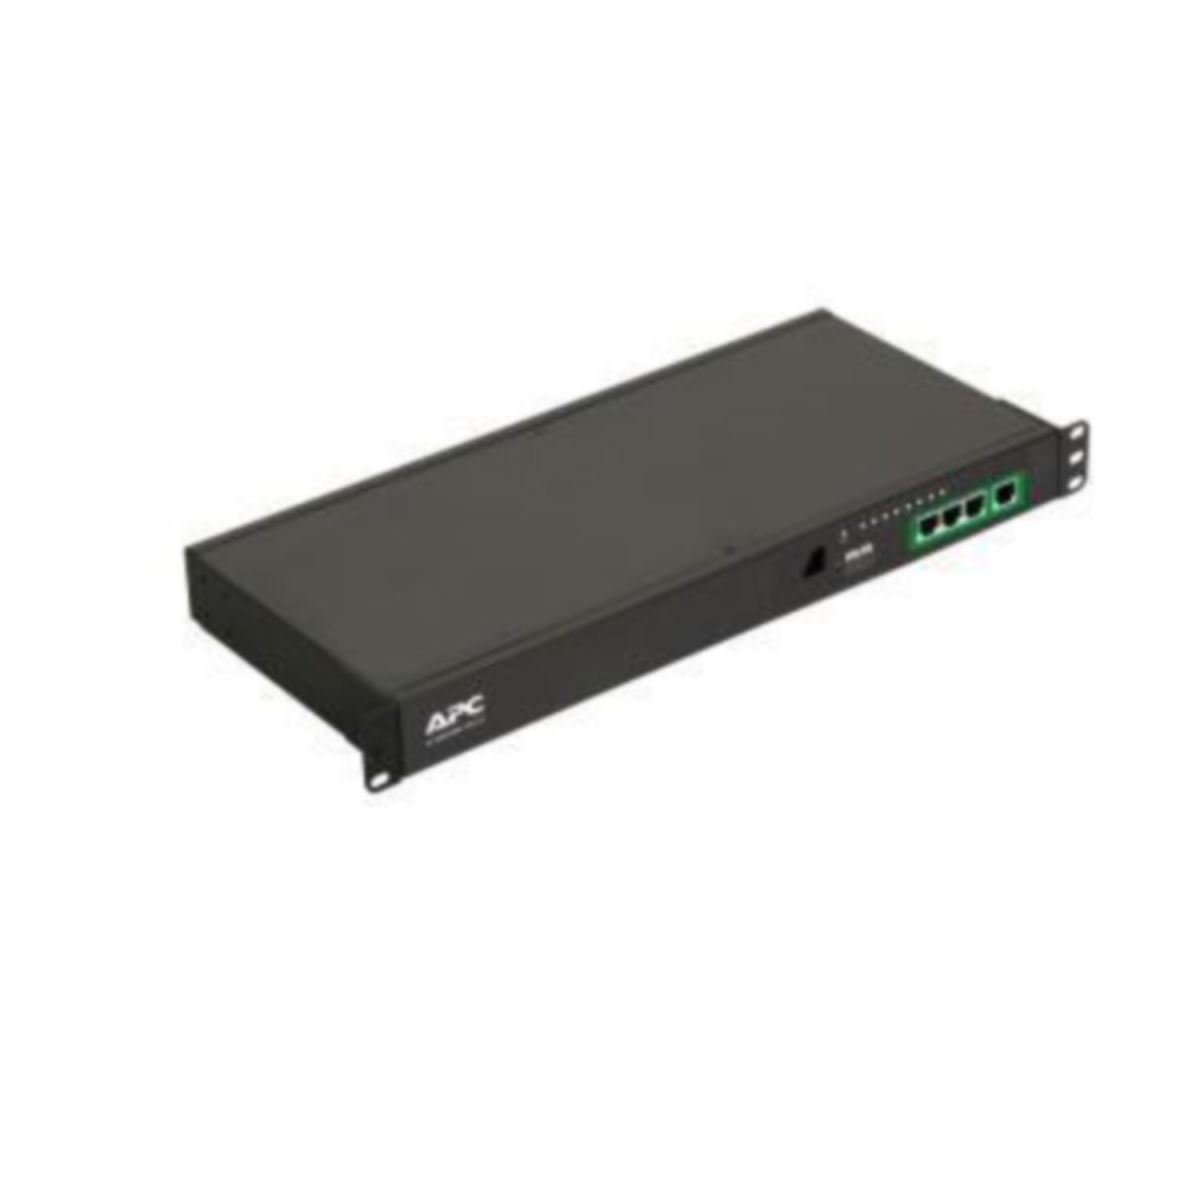 Switched Easy PDU EPDU1016S